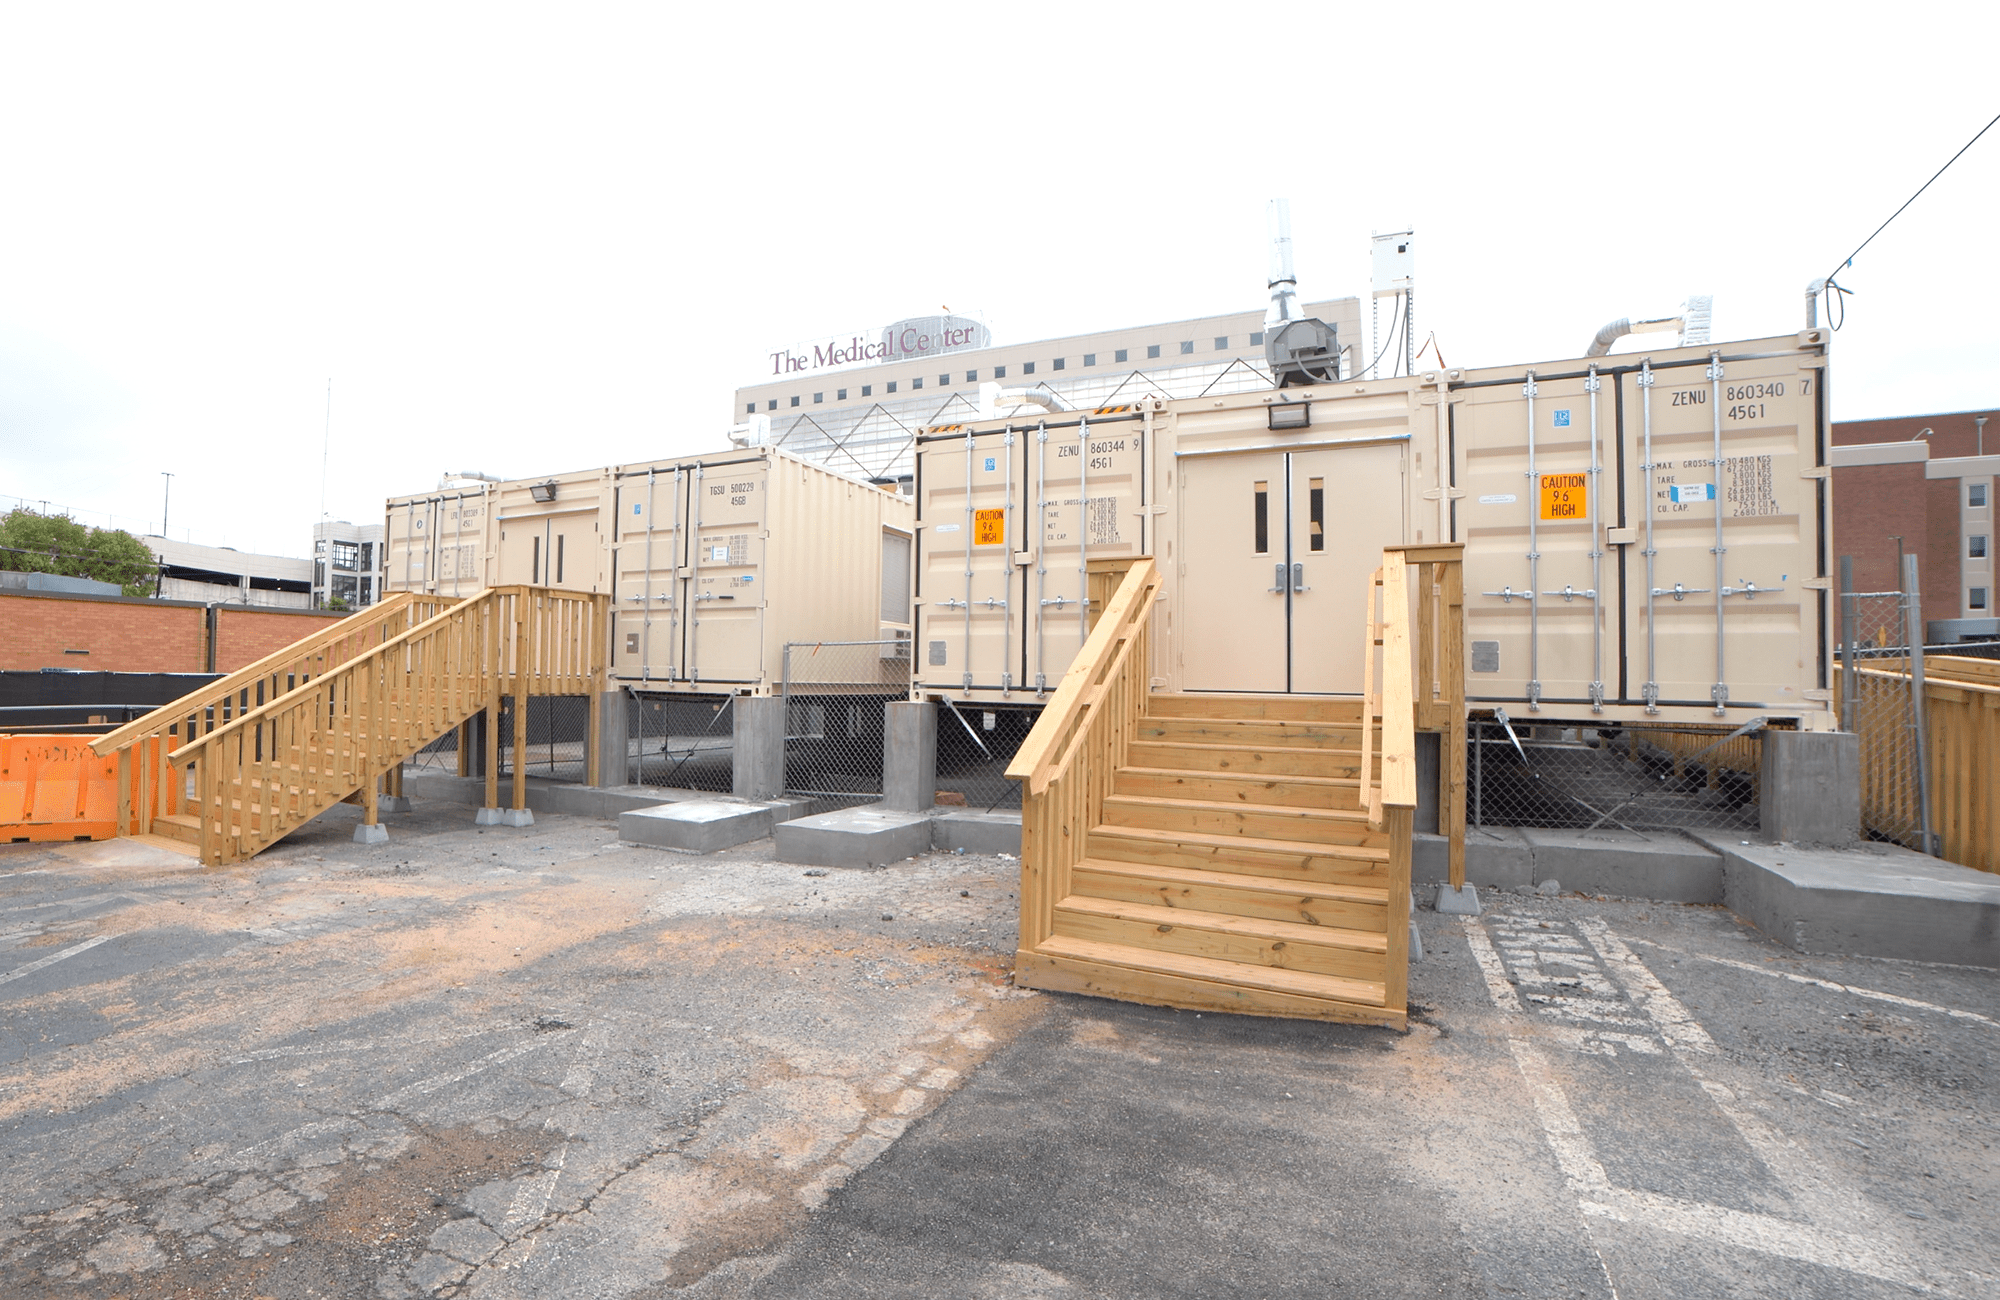 Two portable crisis buildings supplied through MBI members set up outside a medical center